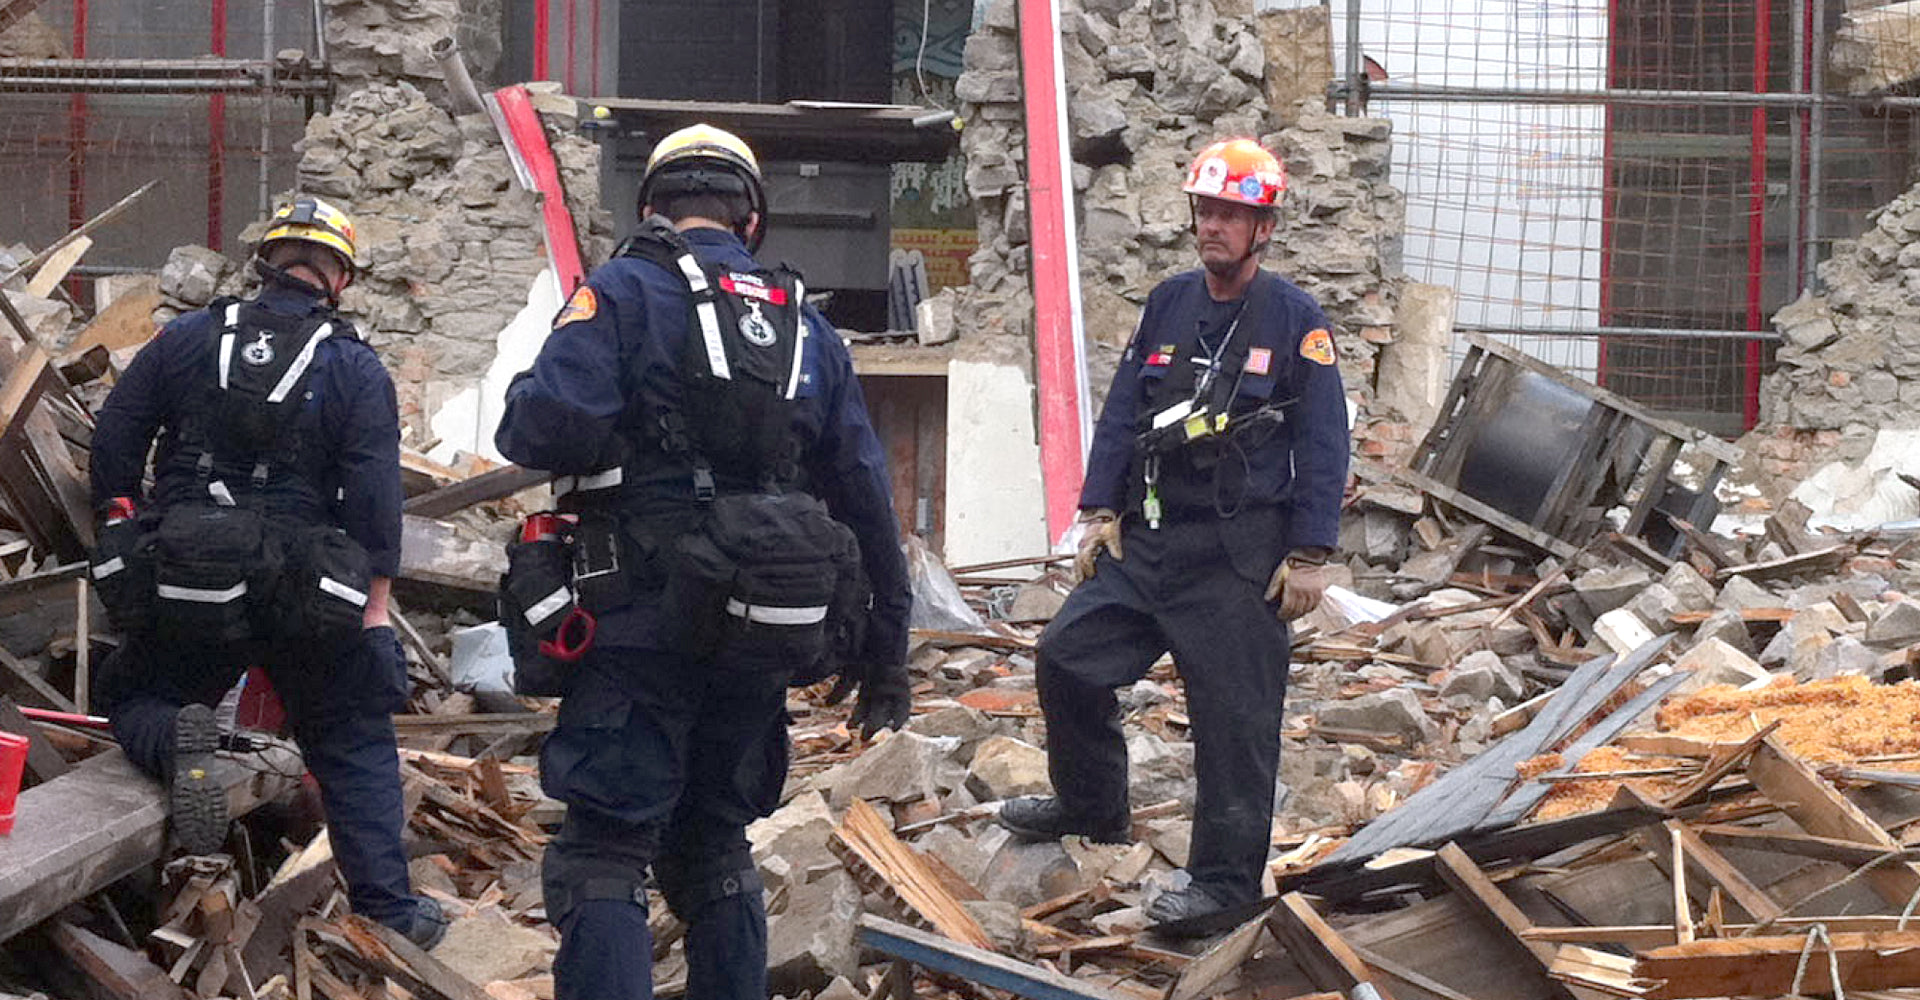 Wolfpack Gear Urban Search and Rescue USAR packs in action